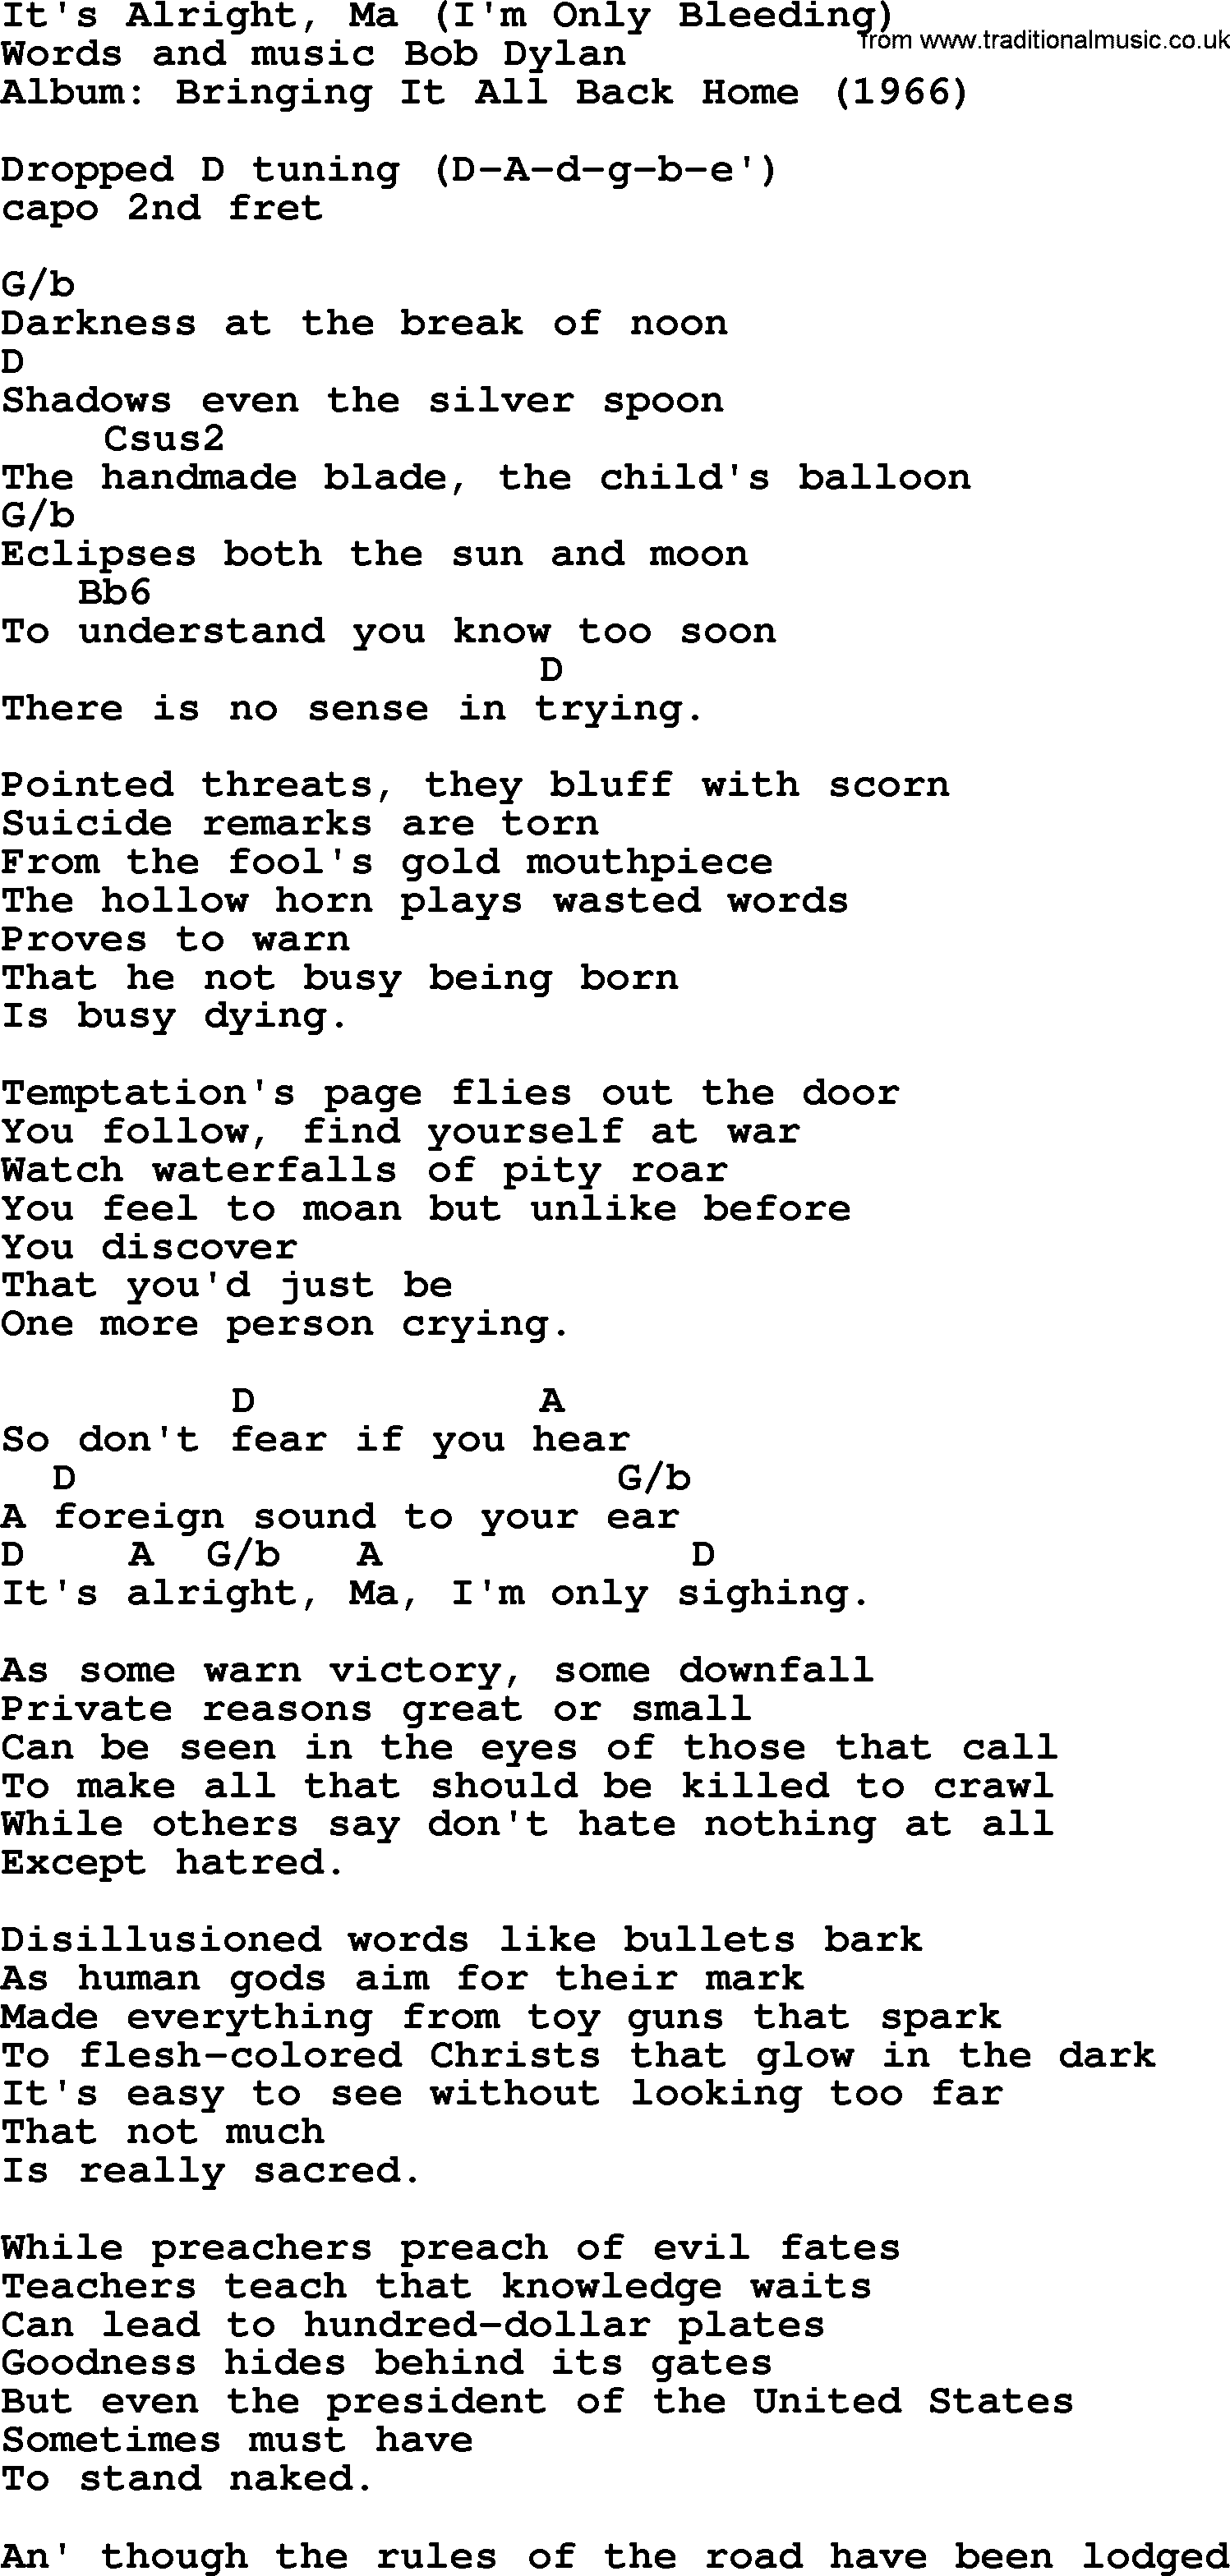 Bob Dylan song, lyrics with chords - It's Alright, Ma (I'm Only Bleeding)